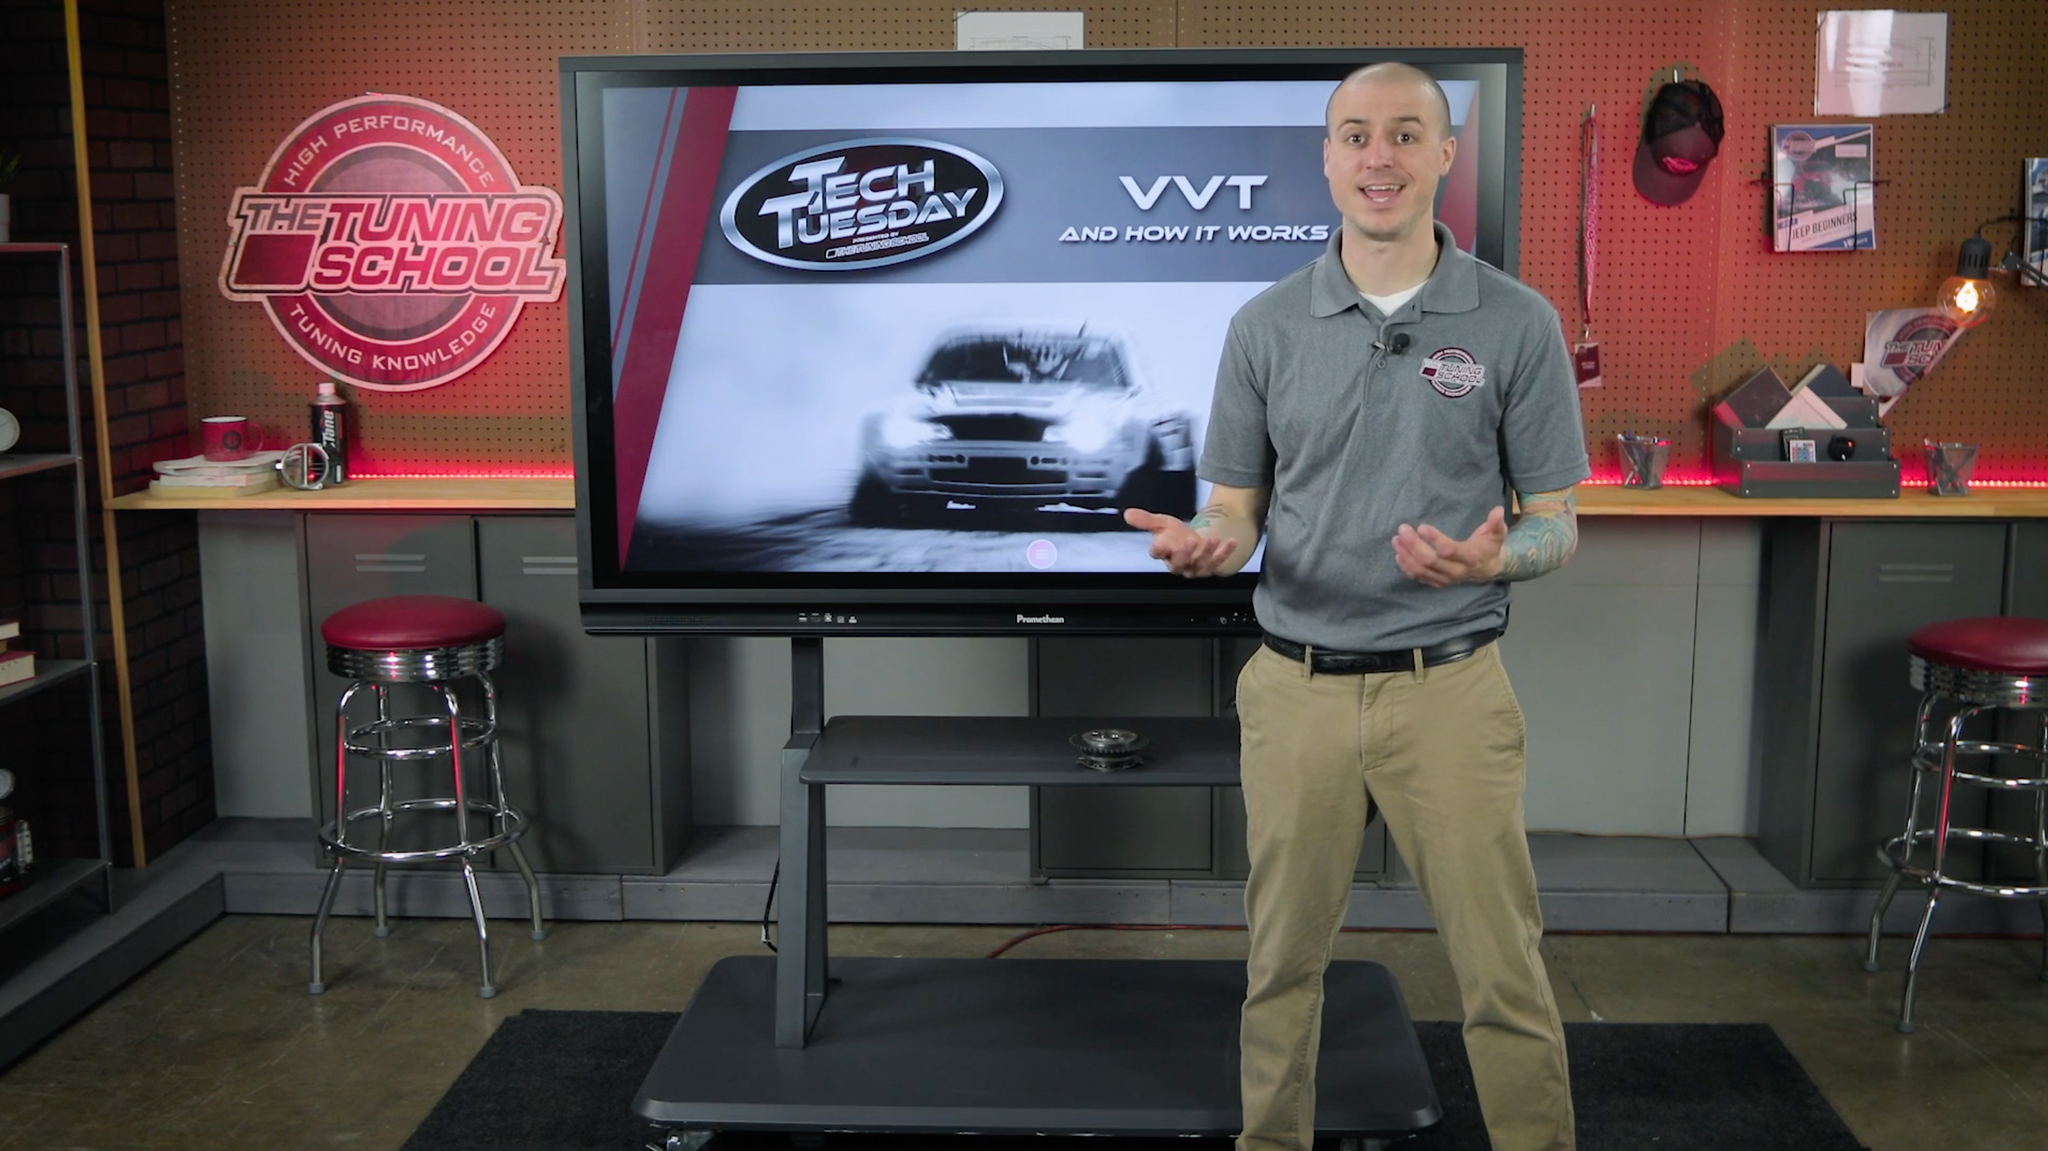 How Can VVT Make More Power?